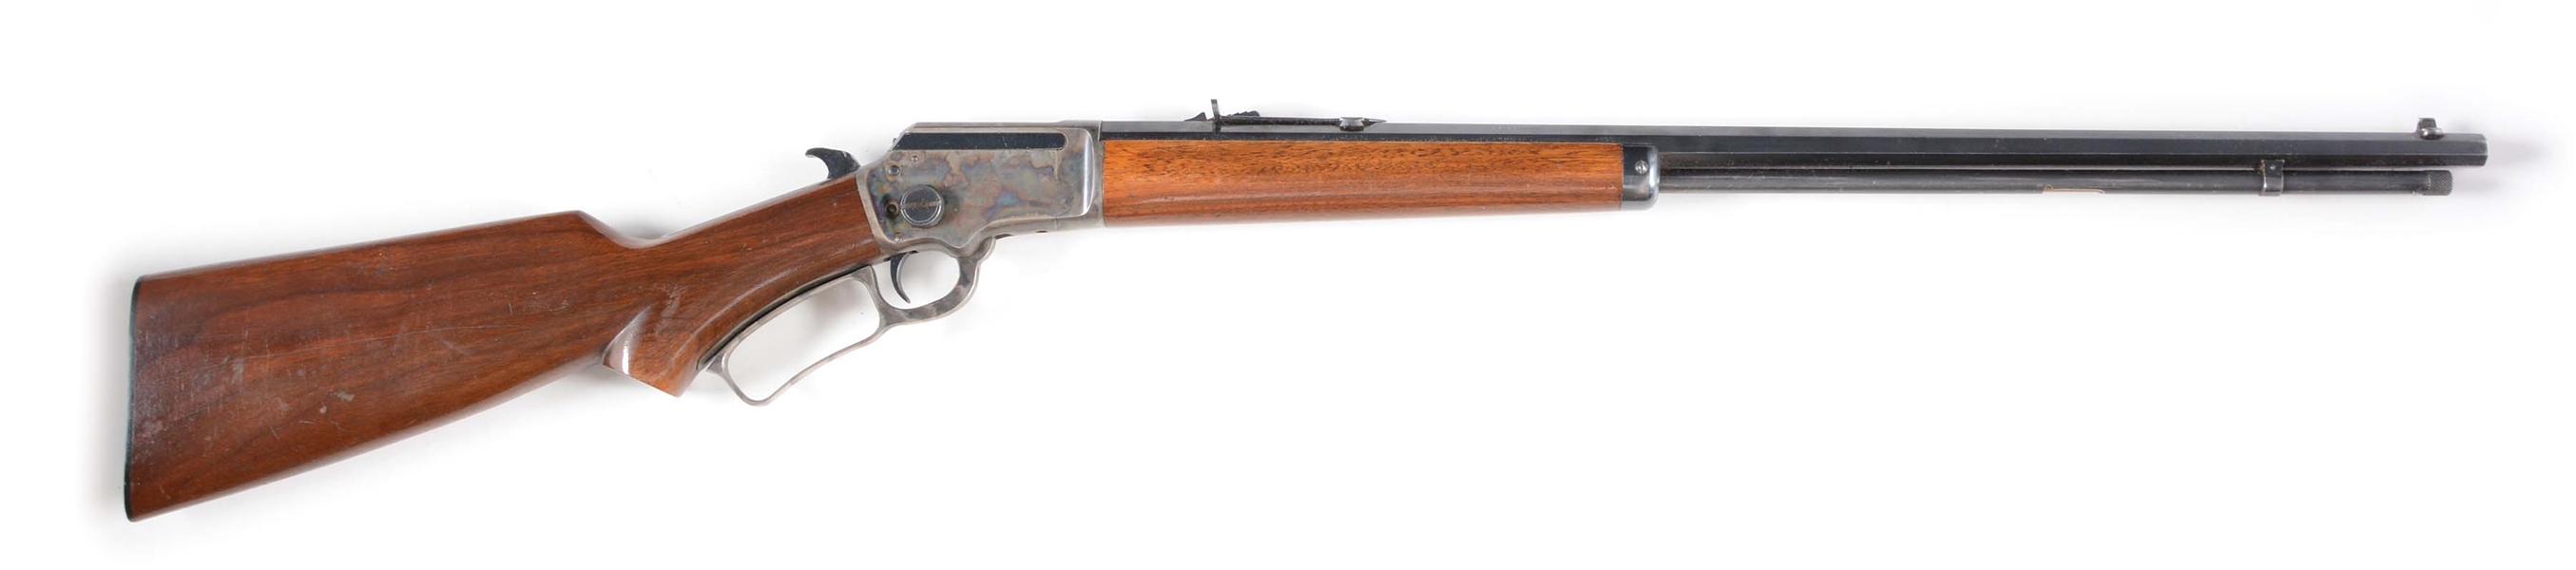 (C) MARLIN 39 LEVER ACTION RIFLE.